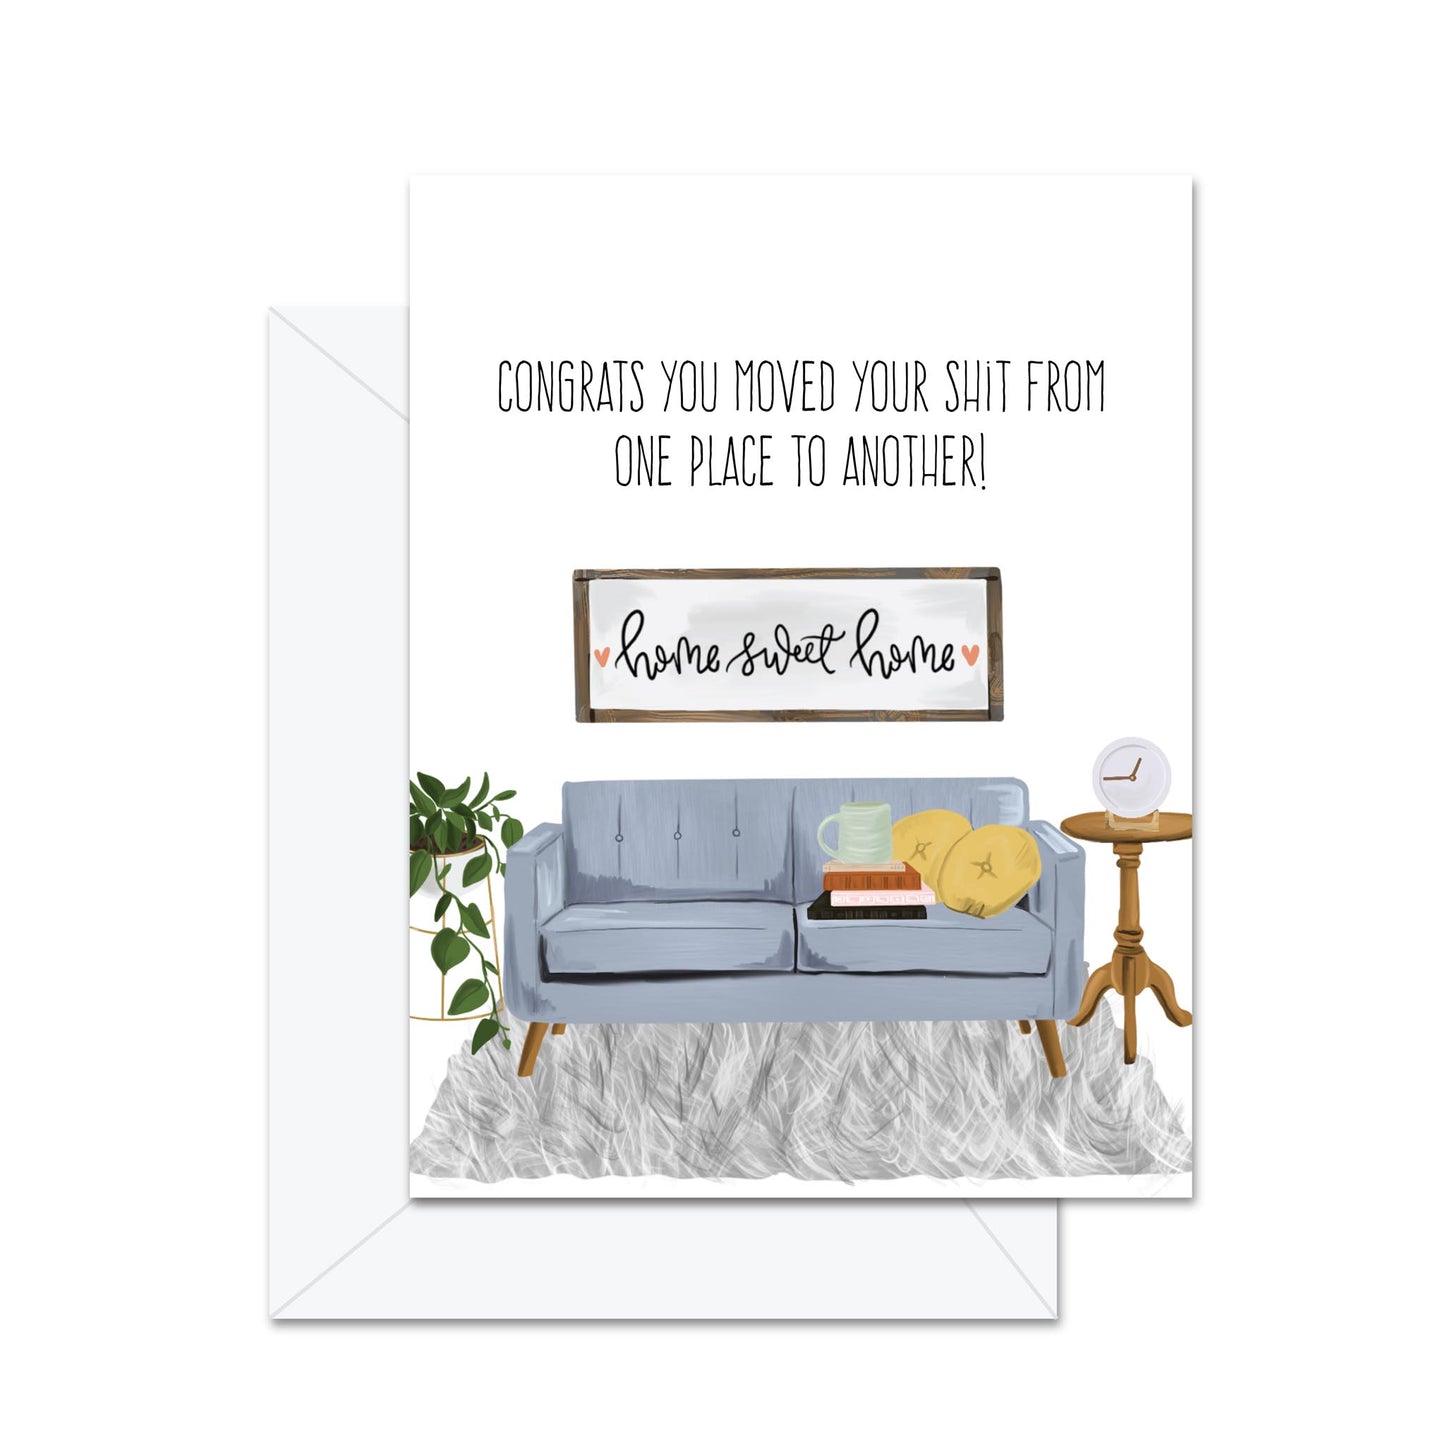 Congrats You Moved Your Shit From One Place To Another! - Greeting Card